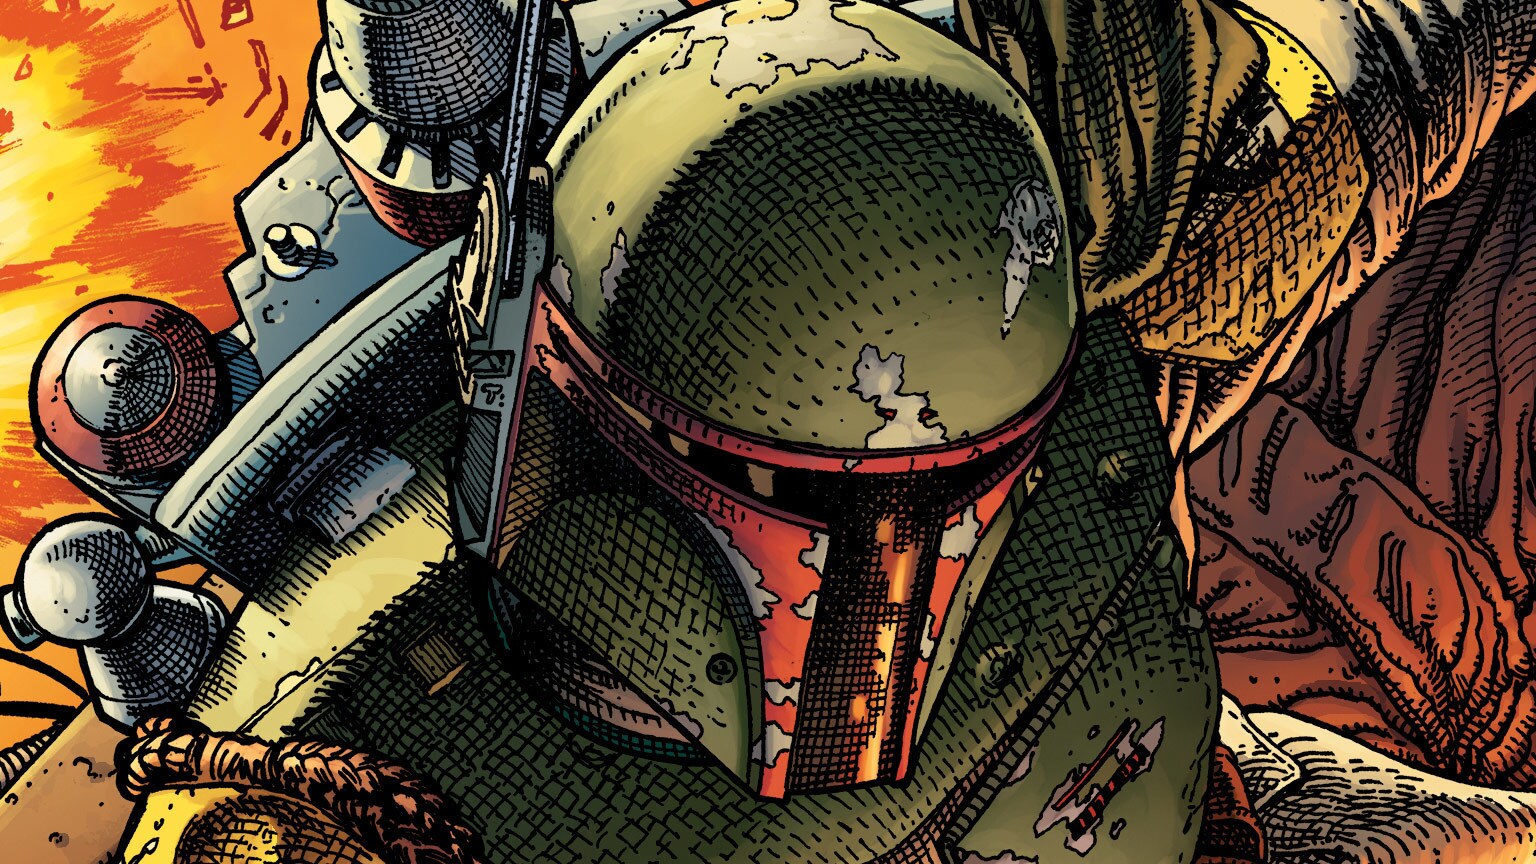 Boba Fett Looks to Deliver Han Solo in Marvel’s Star Wars: War of the Bounty Hunters Alpha #1 - Exclusive Preview